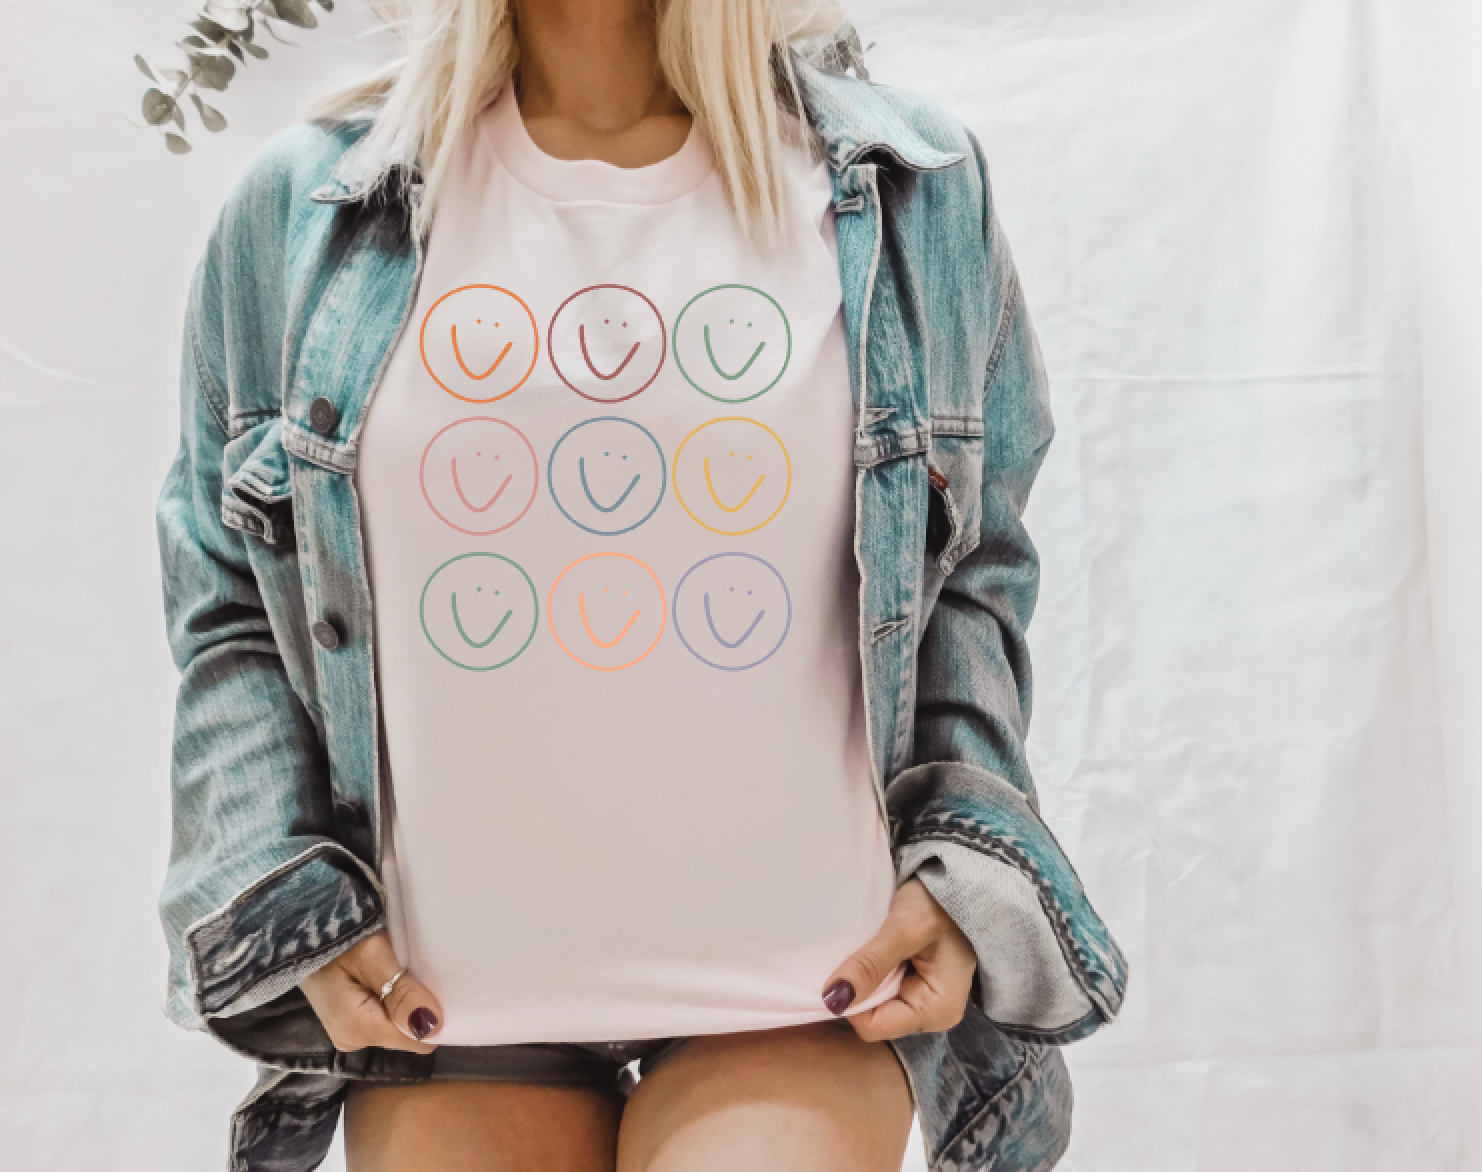 All the Smiley Faces Short Sleeve Tee